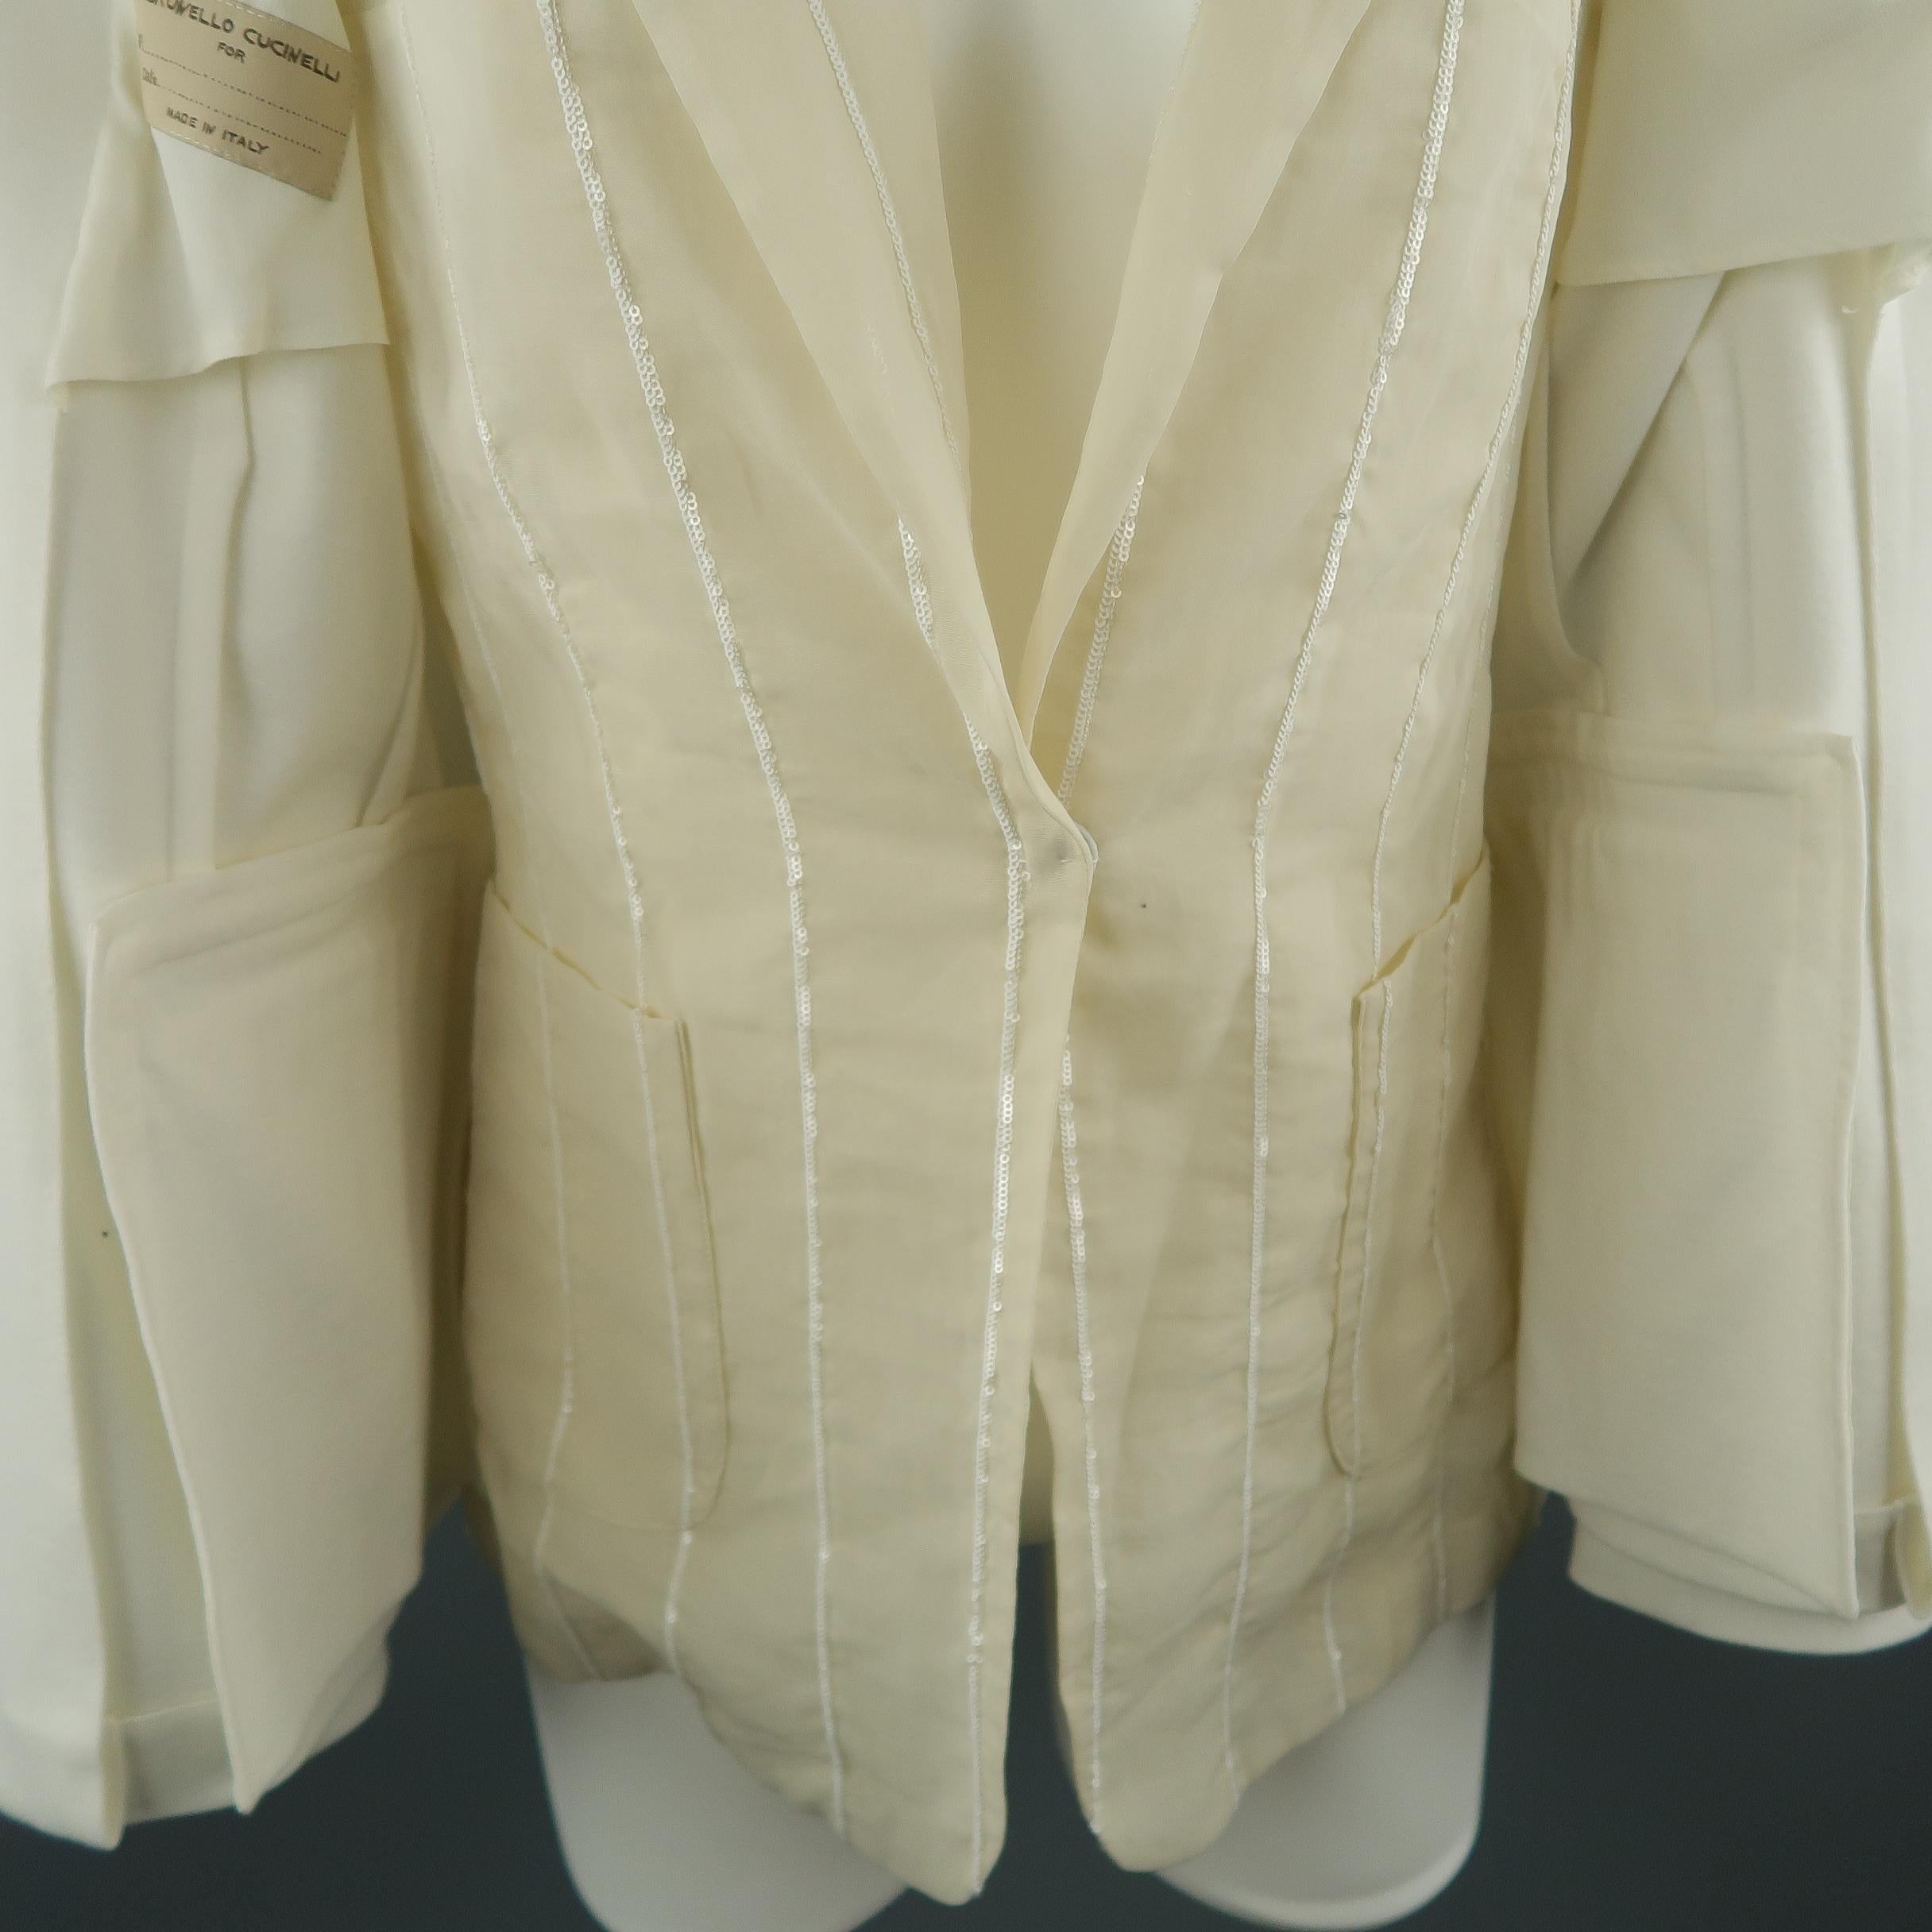 BRUNELLO CUCINELLI blazer comes in cream jersey knit with a peak lapel, single button, and inner beige chiffon lapel layer with white sequin trim. Made in Italy.
 
Excellent Pre-Owned Condition.
Marked: IT 38
 
Measurements:
 
Shoulder: 14.5